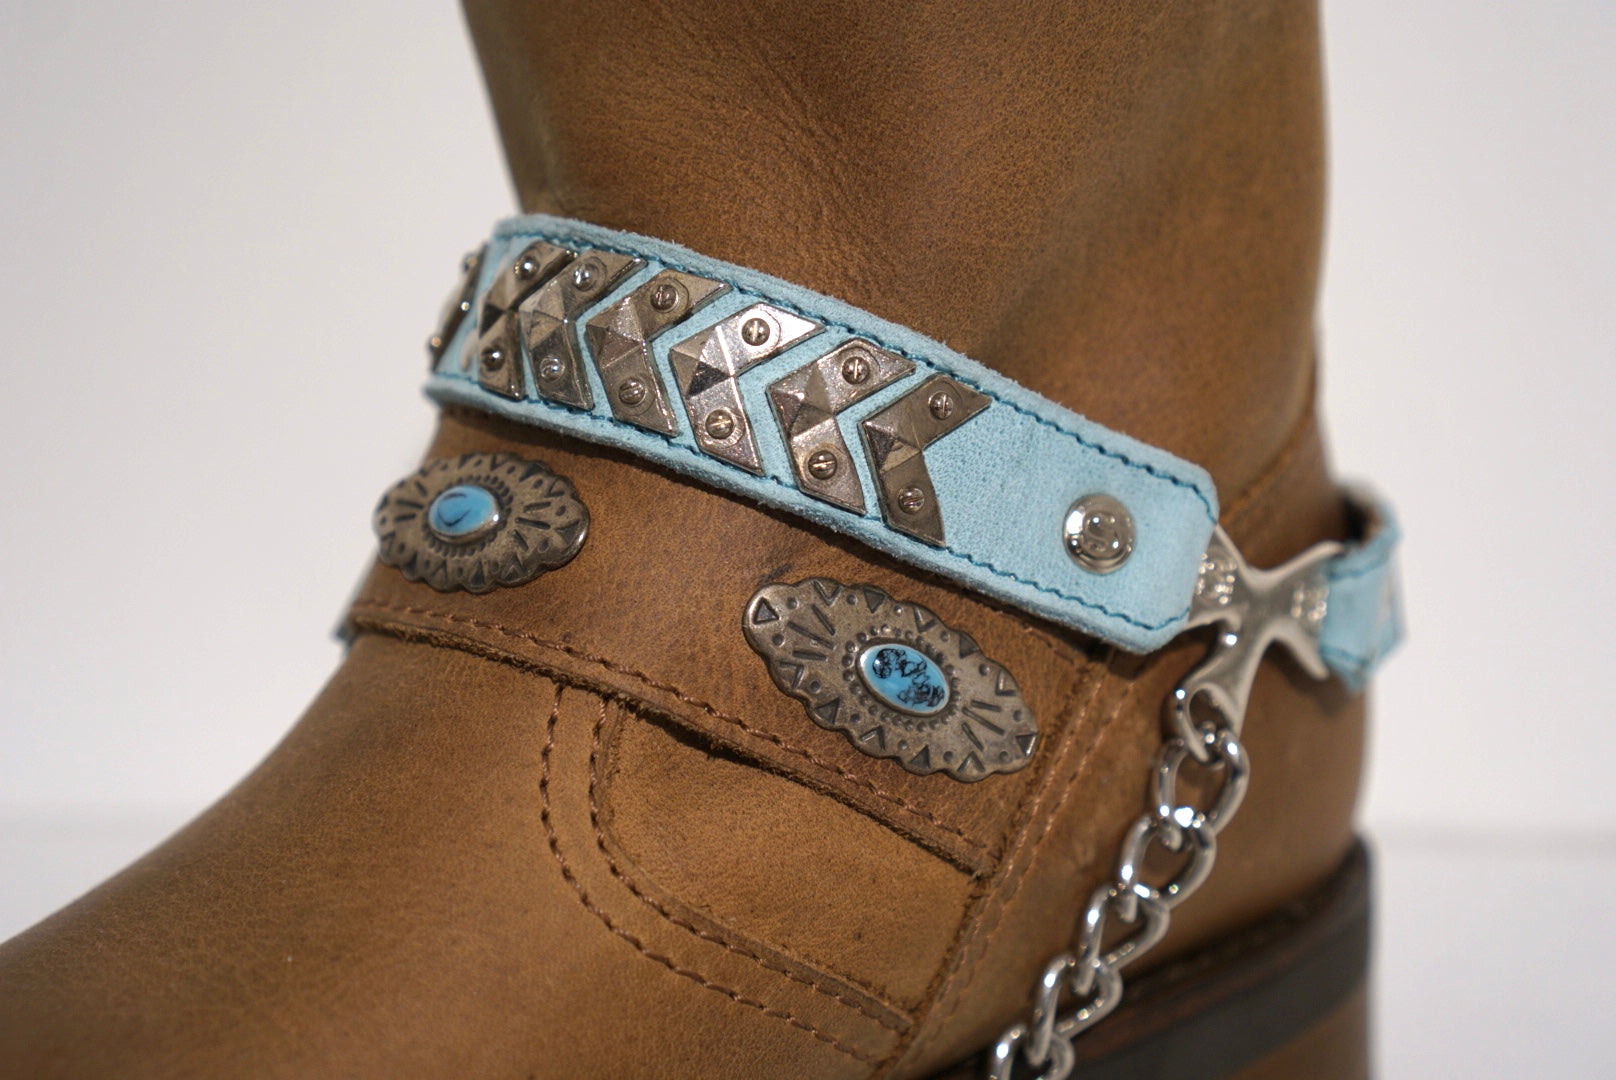 Sendra spores - light turquoise with silver arrows